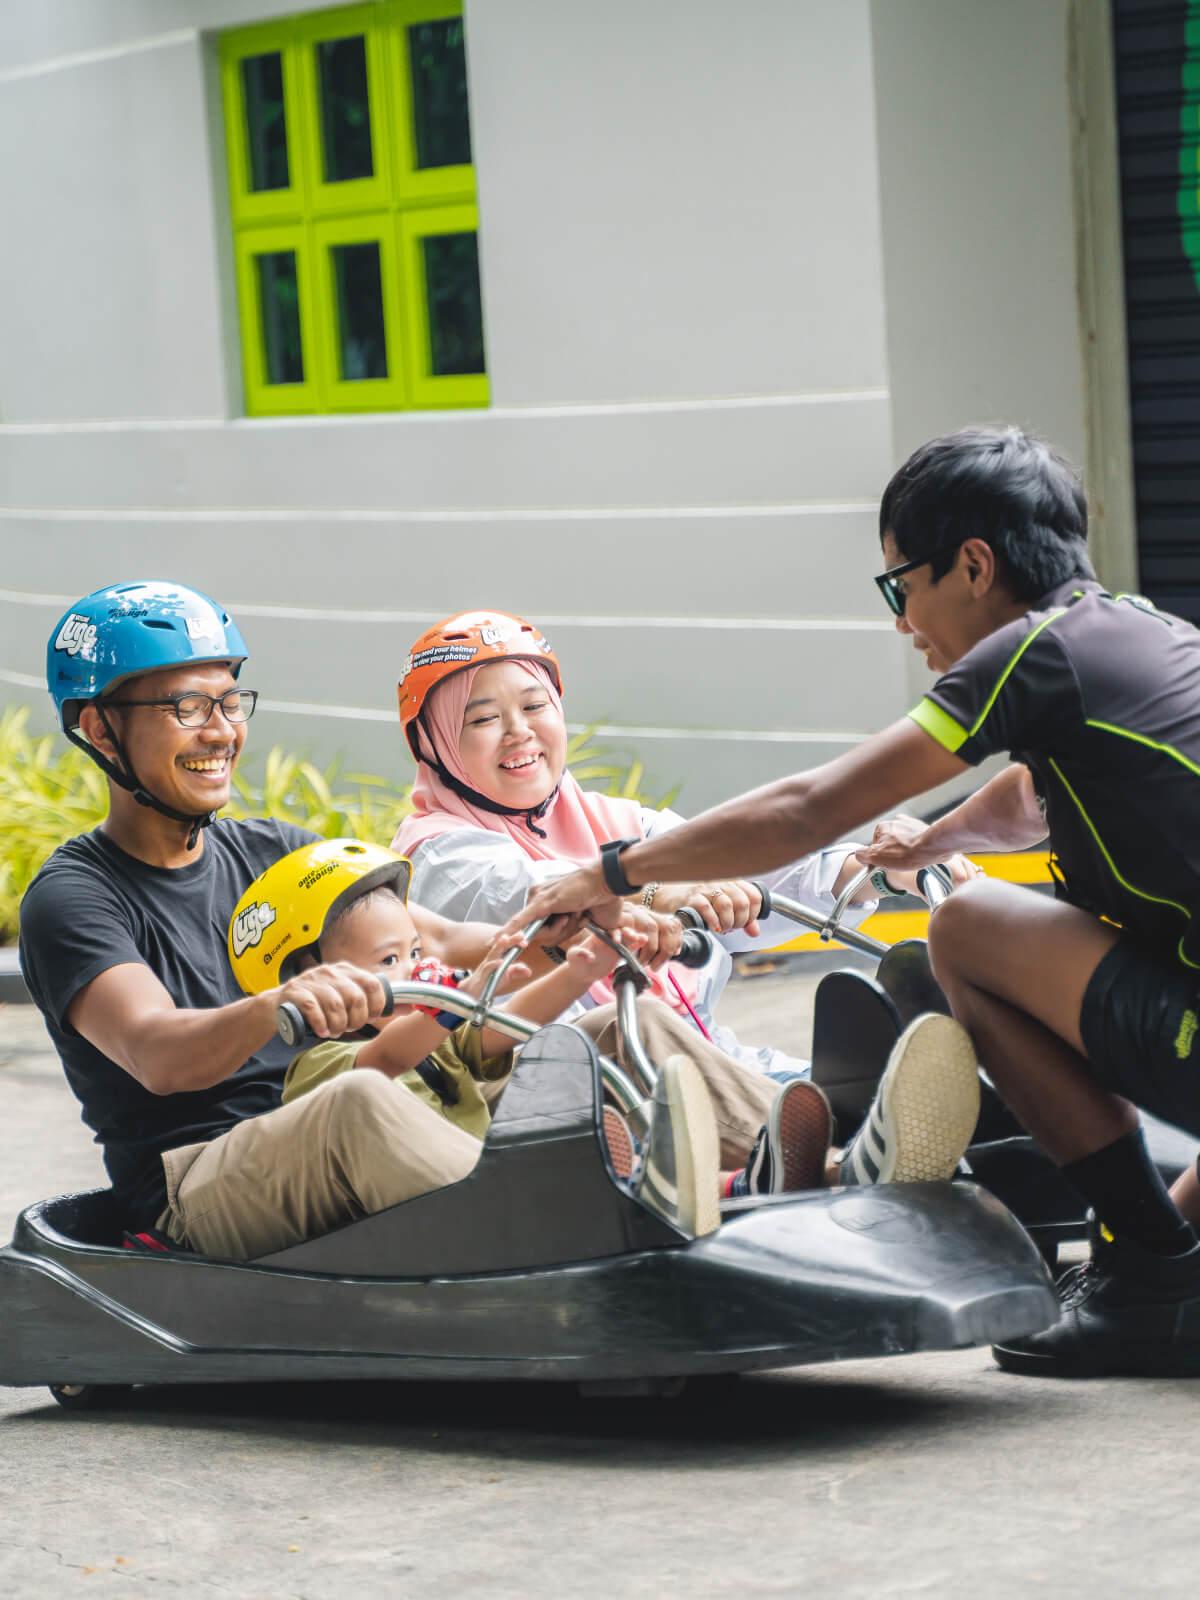 A Skyline Luge Singapore employee teaches a family how to use the Luge carts safely.